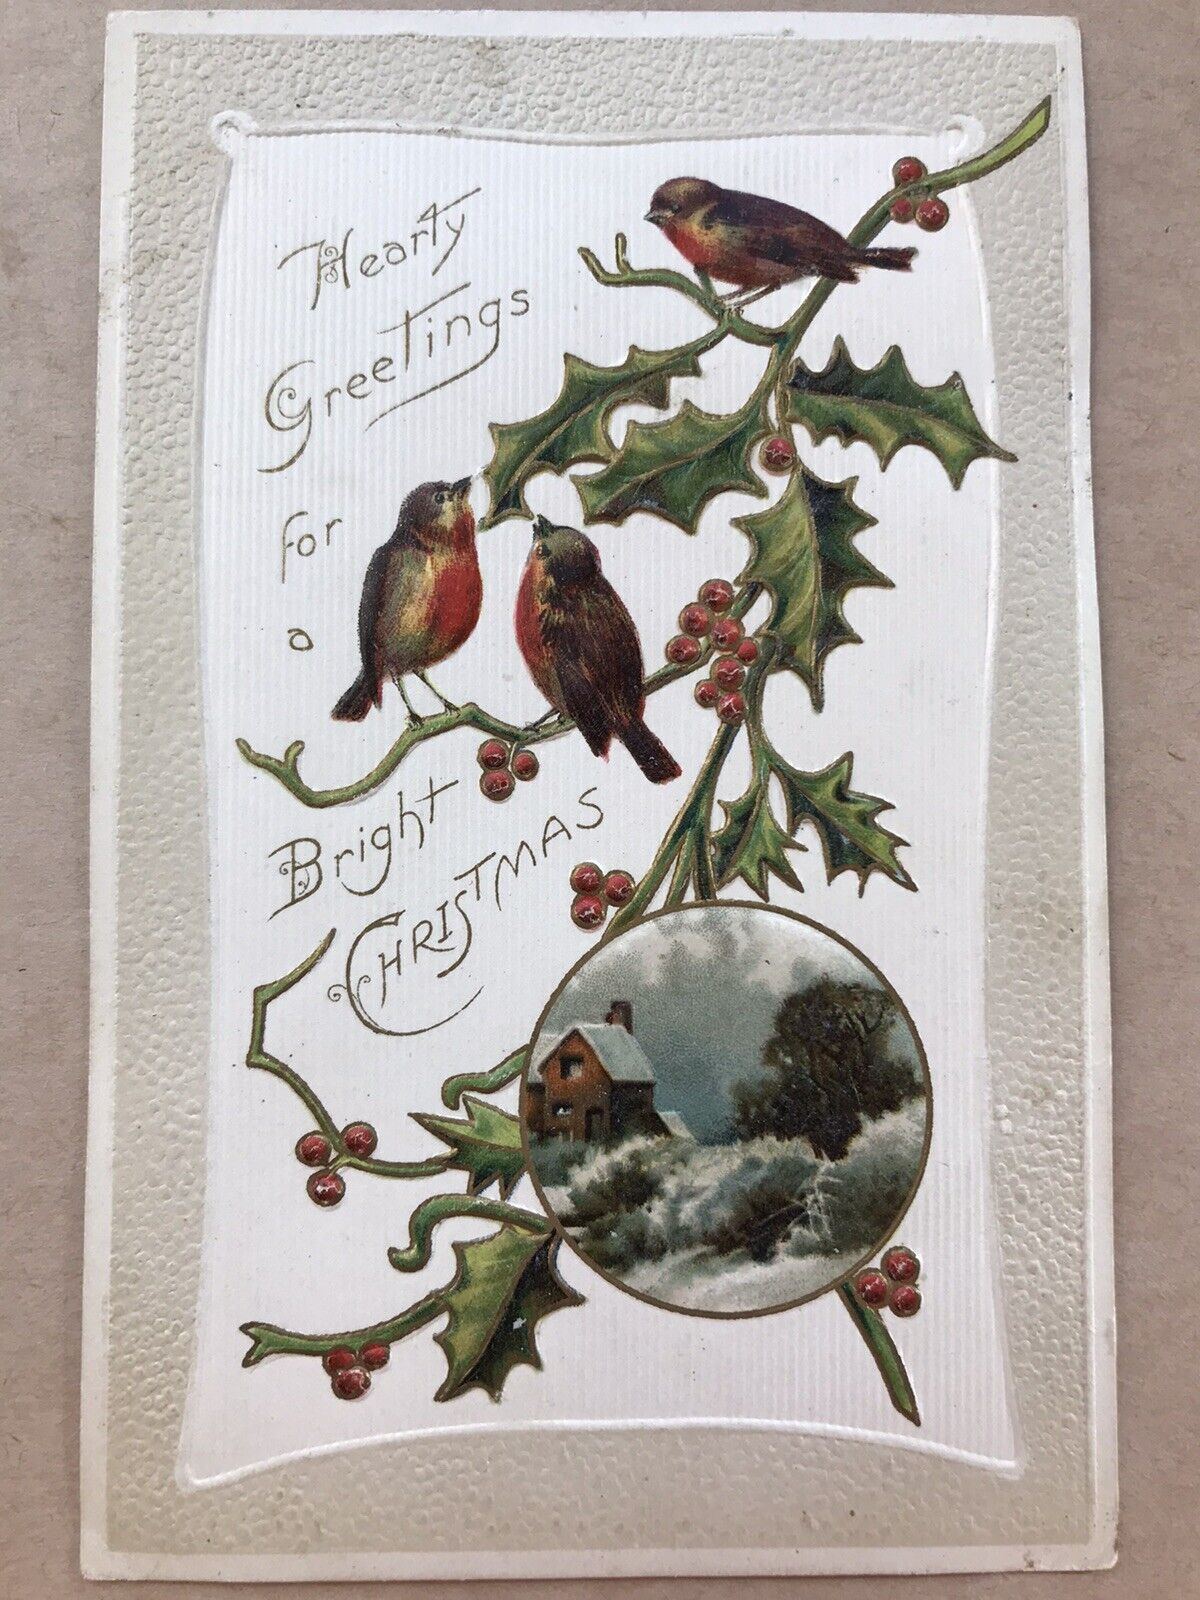 Hearty Greetings For A Bright Christmas Birds Holly Berries Scene 1908 Post Card